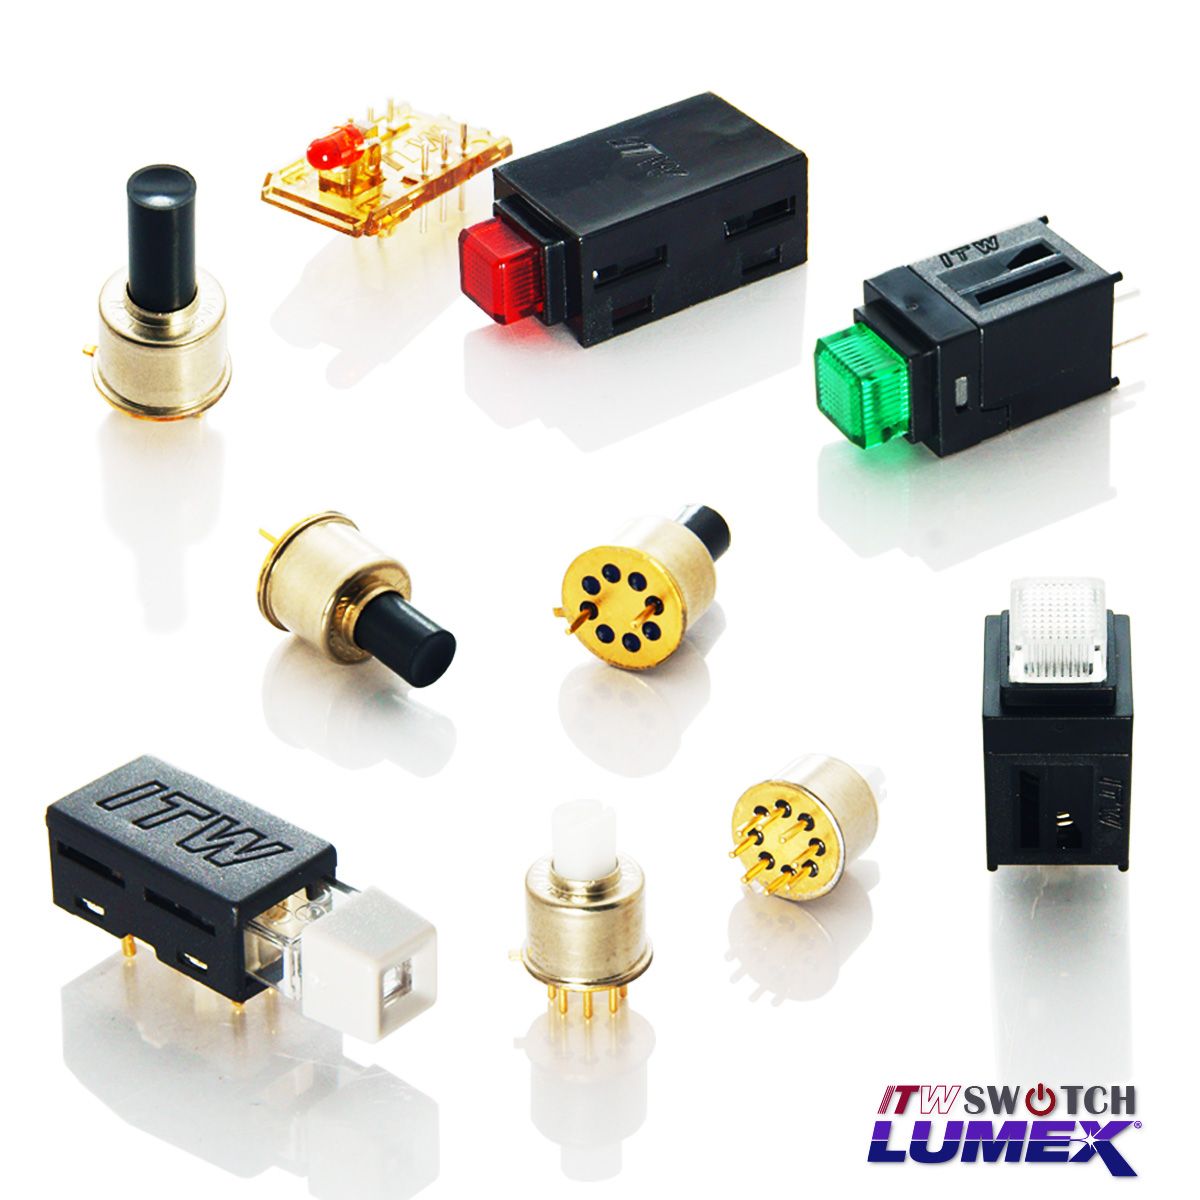 ITW Lumex Switch provides miniature LED lighted push button switches for PCBA applications.